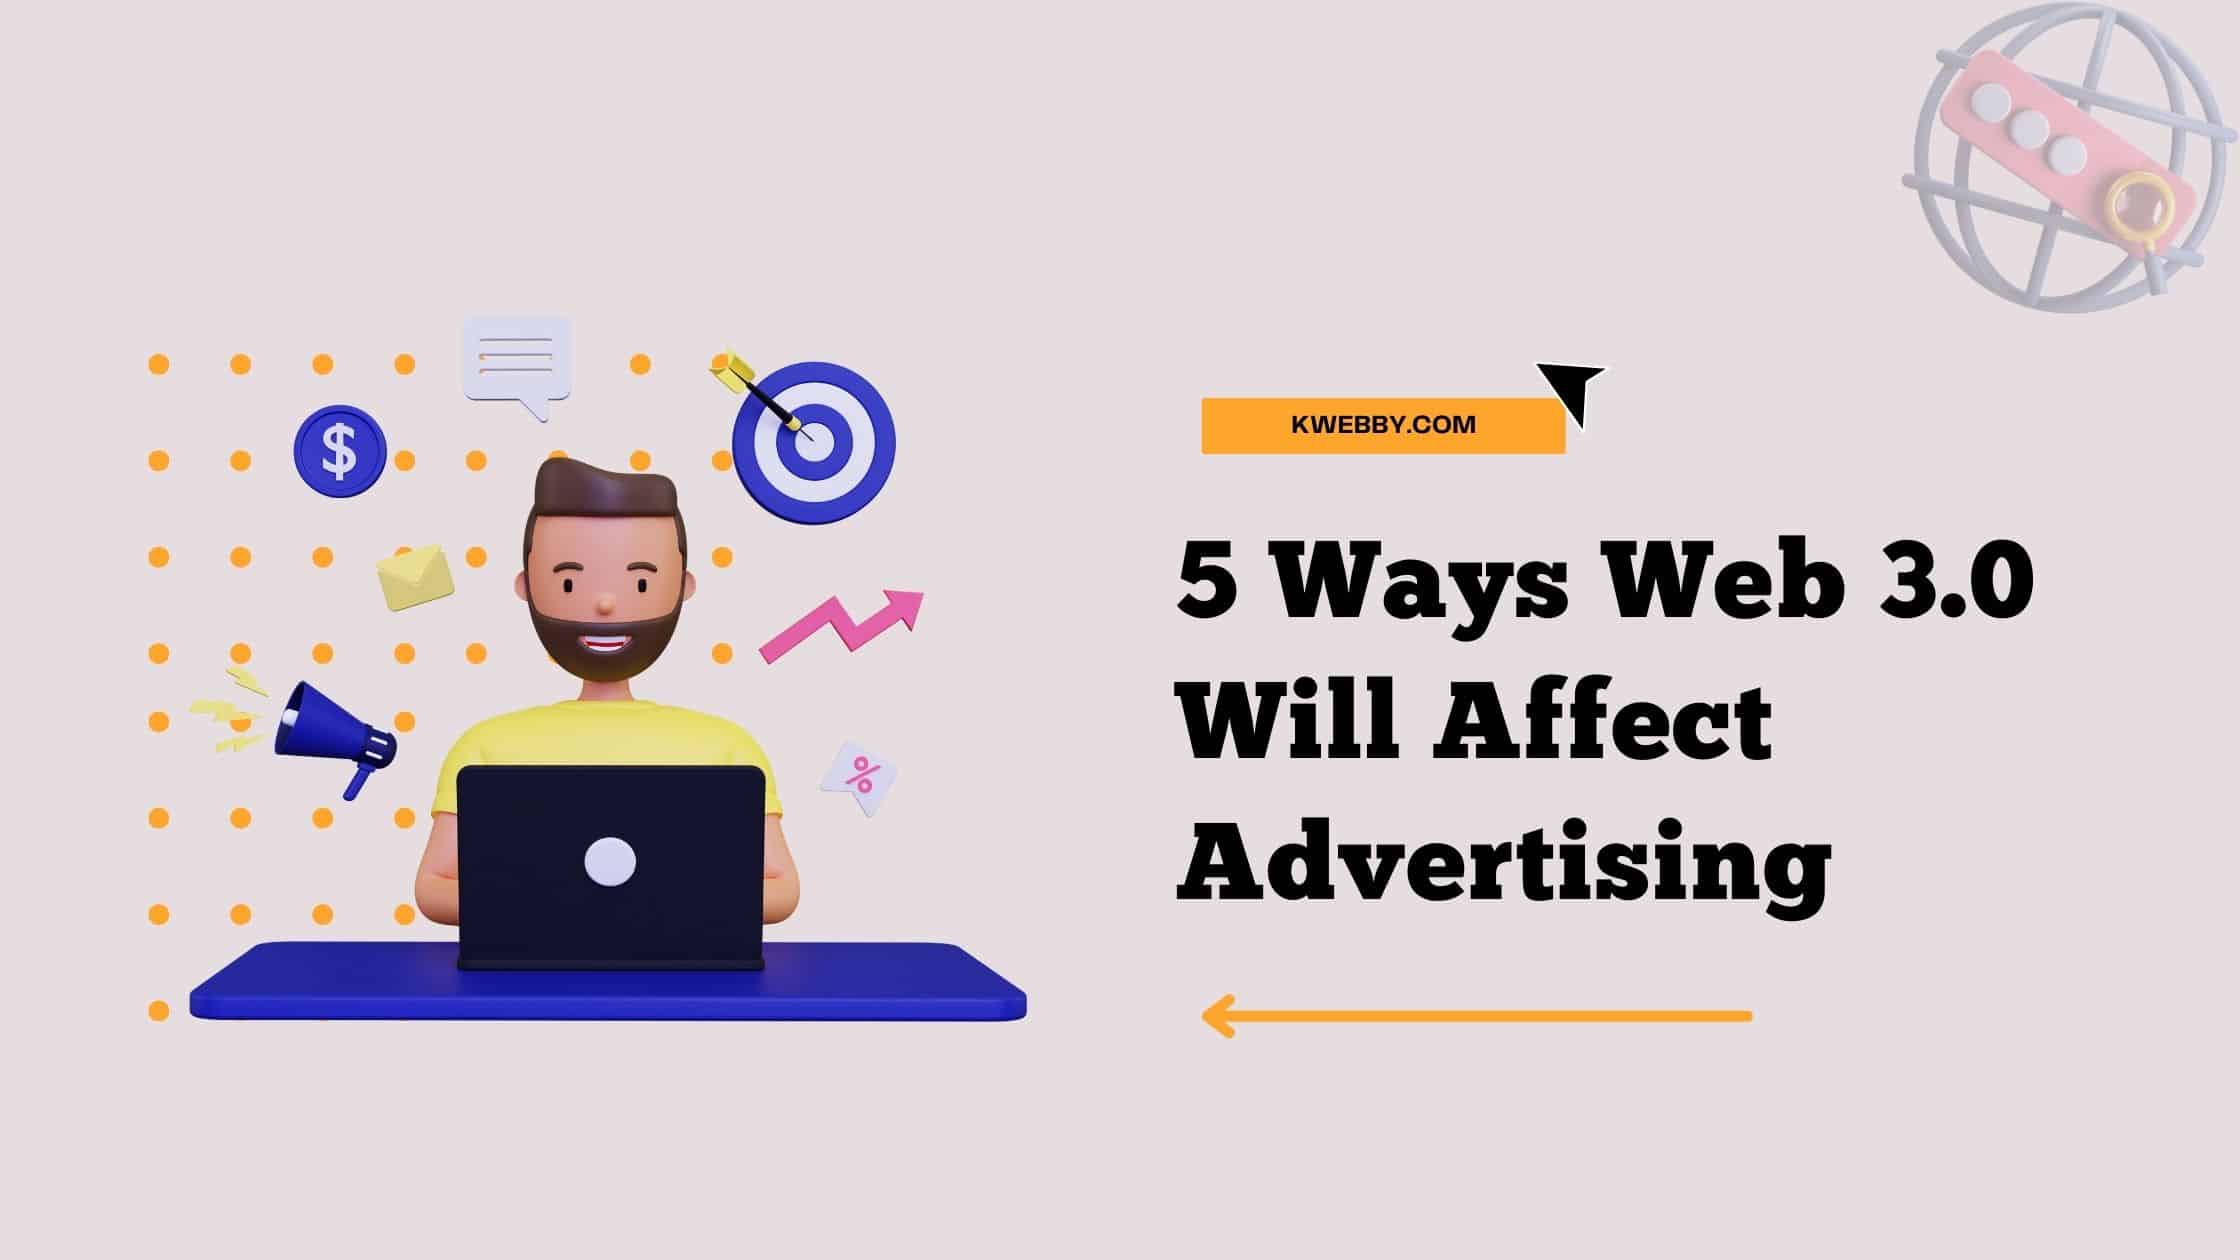 5 Ways Web 3.0 Will Affect Advertising